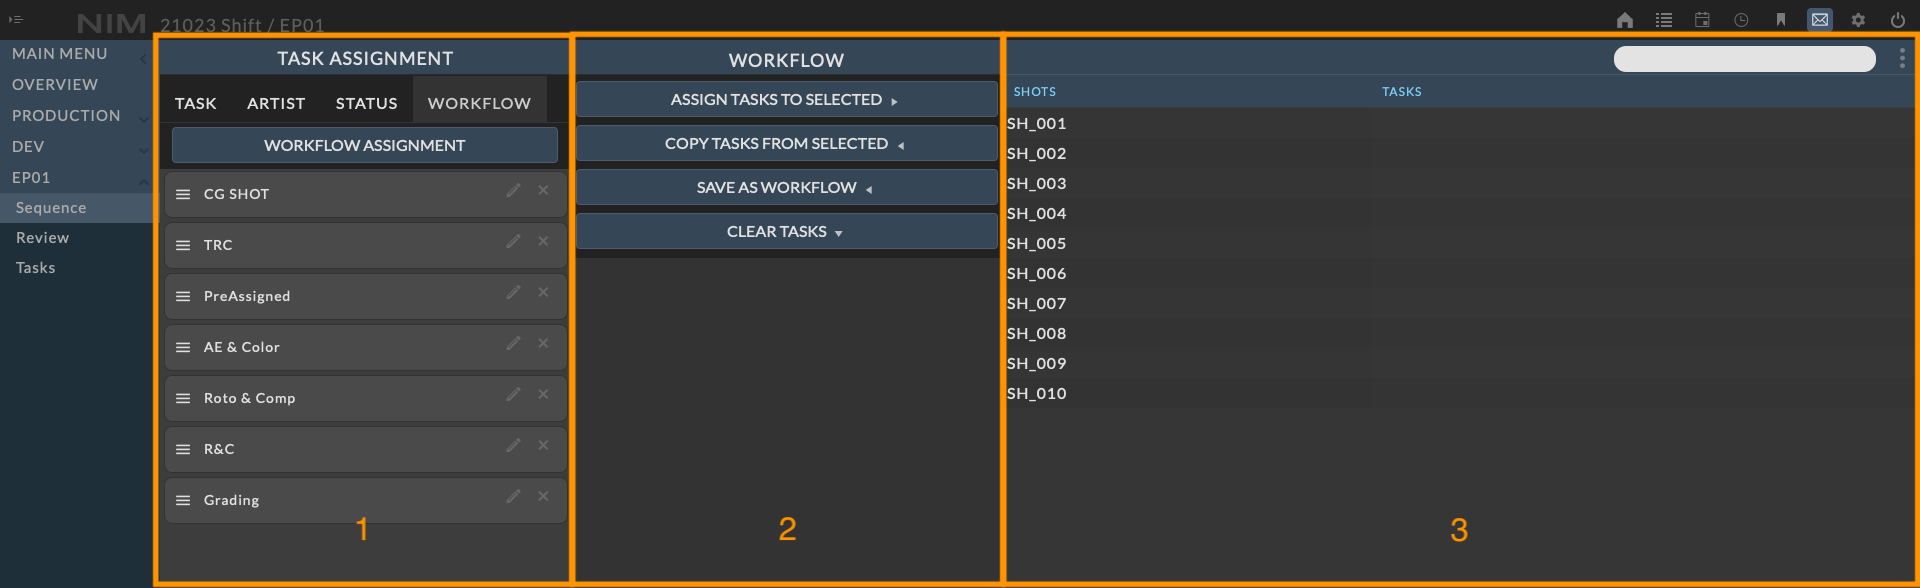 _images/nim5_task_workflow_panel_highlighted.png